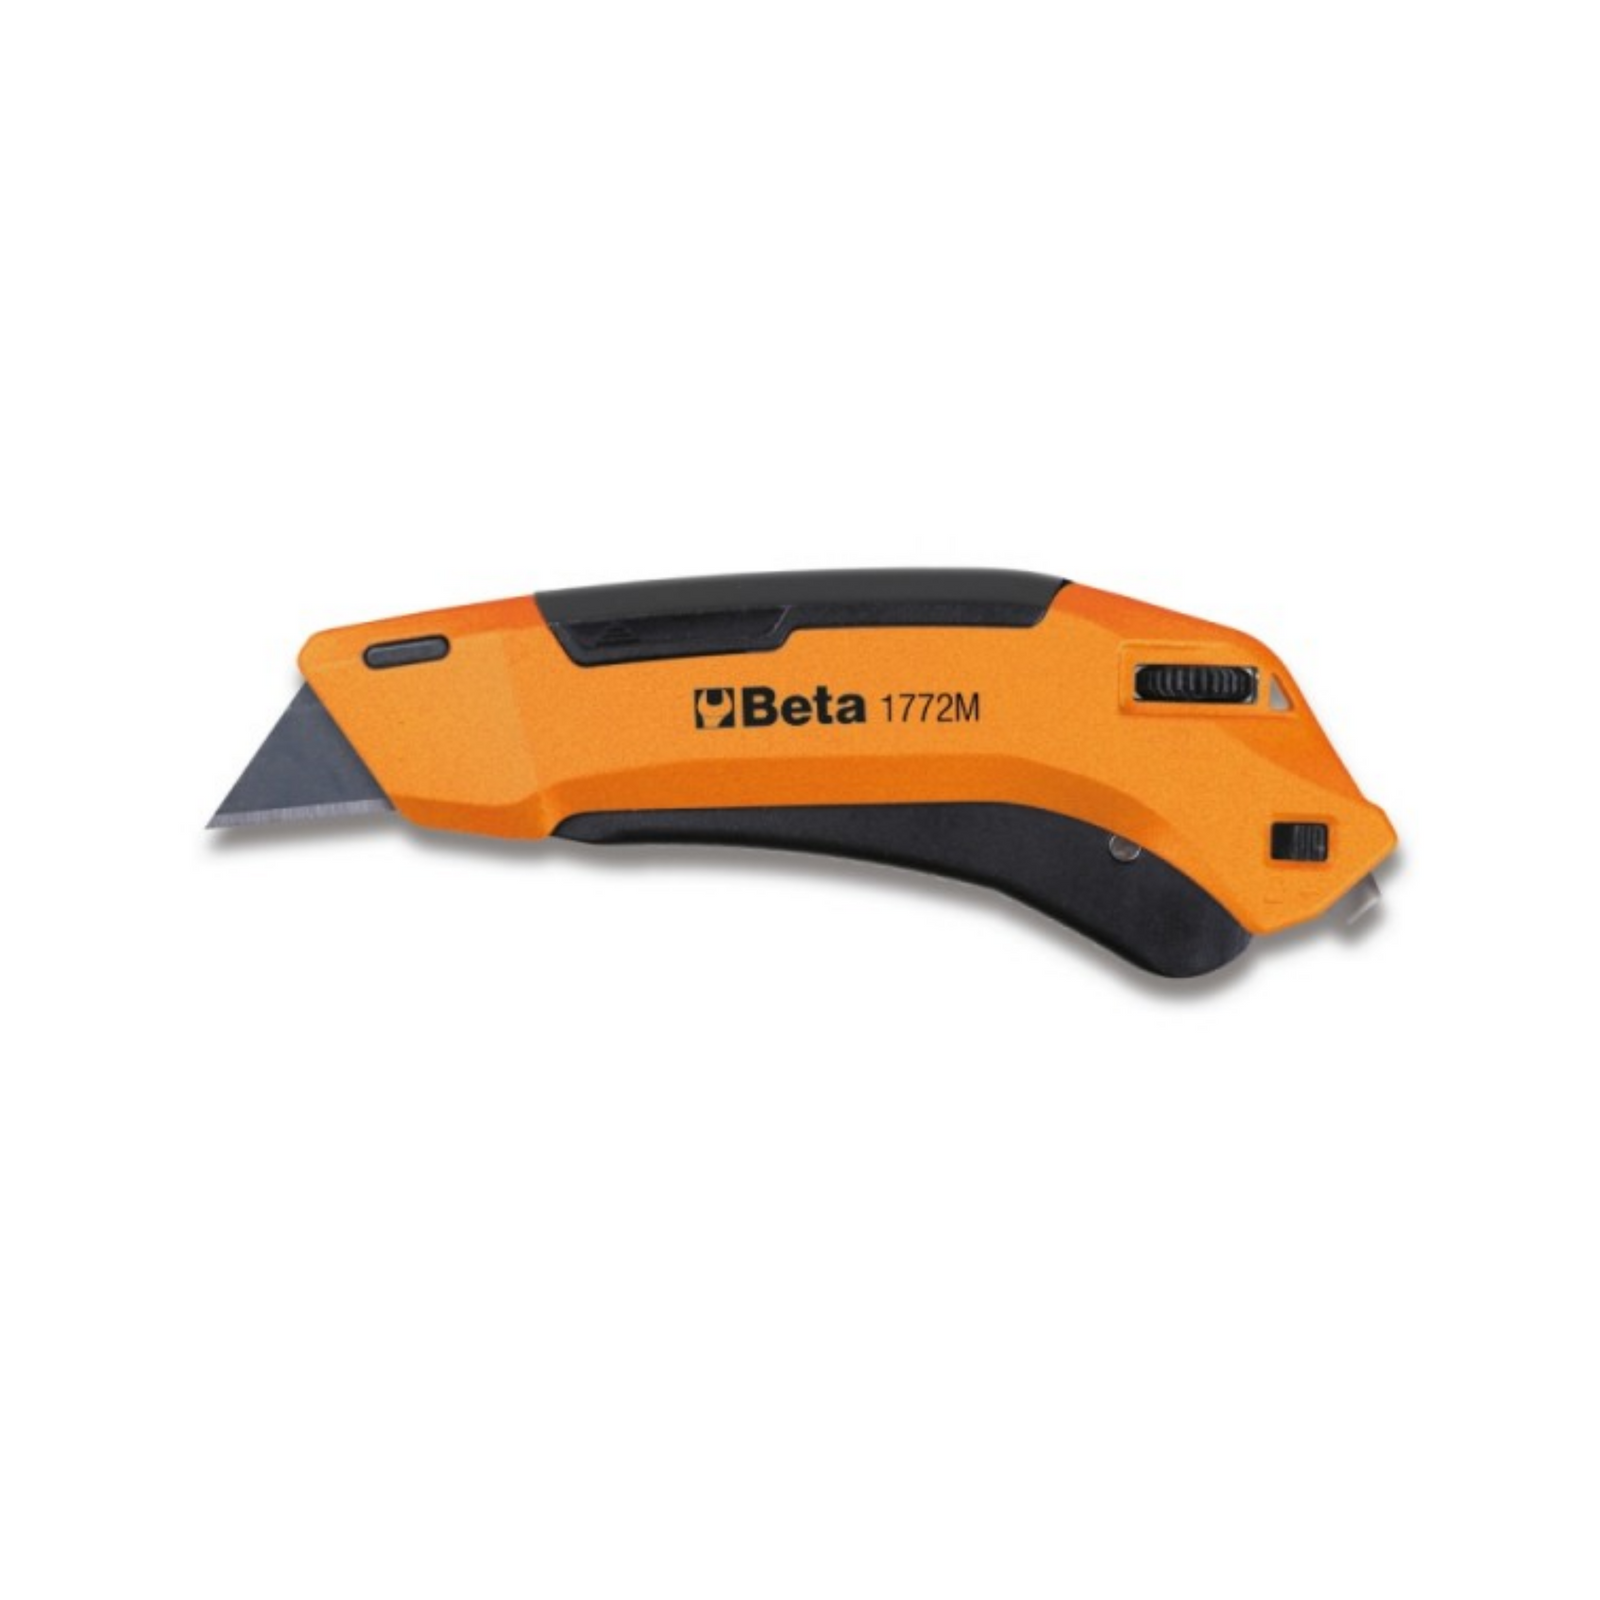 Beta safety knife 18mm, 170mm long. With retractable cutting blade and 3 spare blades